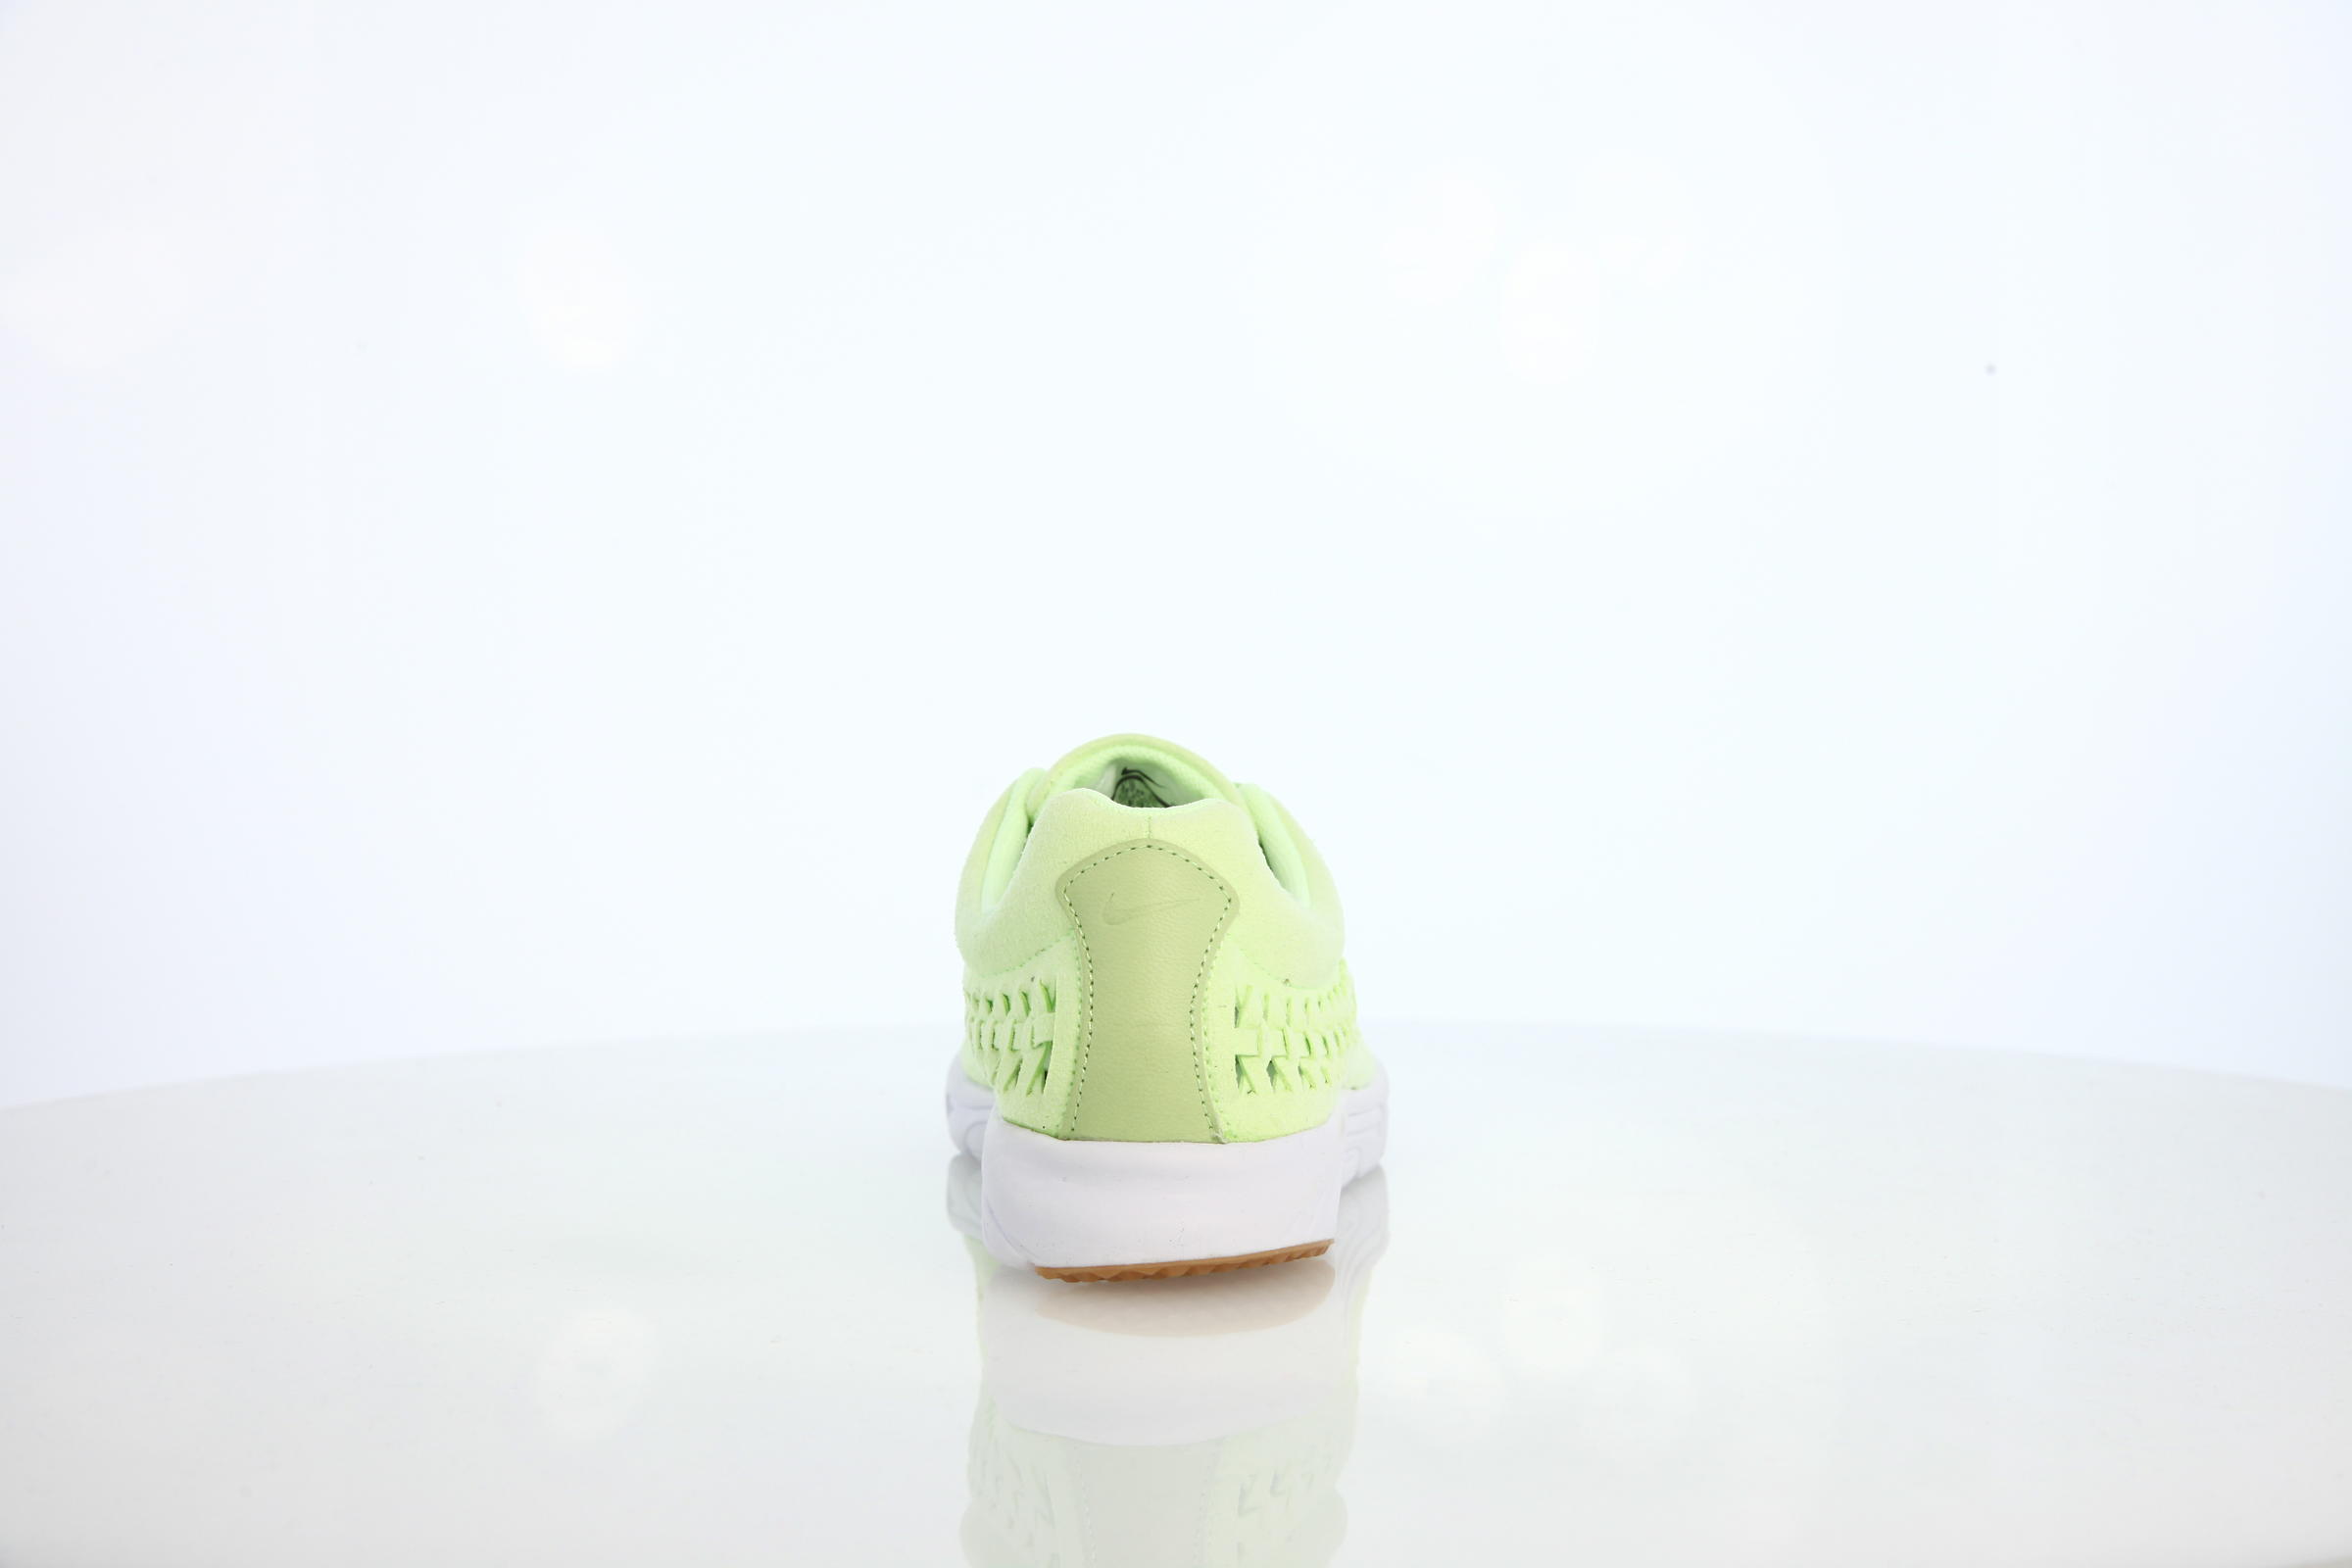 Nike Wmns Mayfly Woven QS Pastel Pack "Lt Liquid Lime"